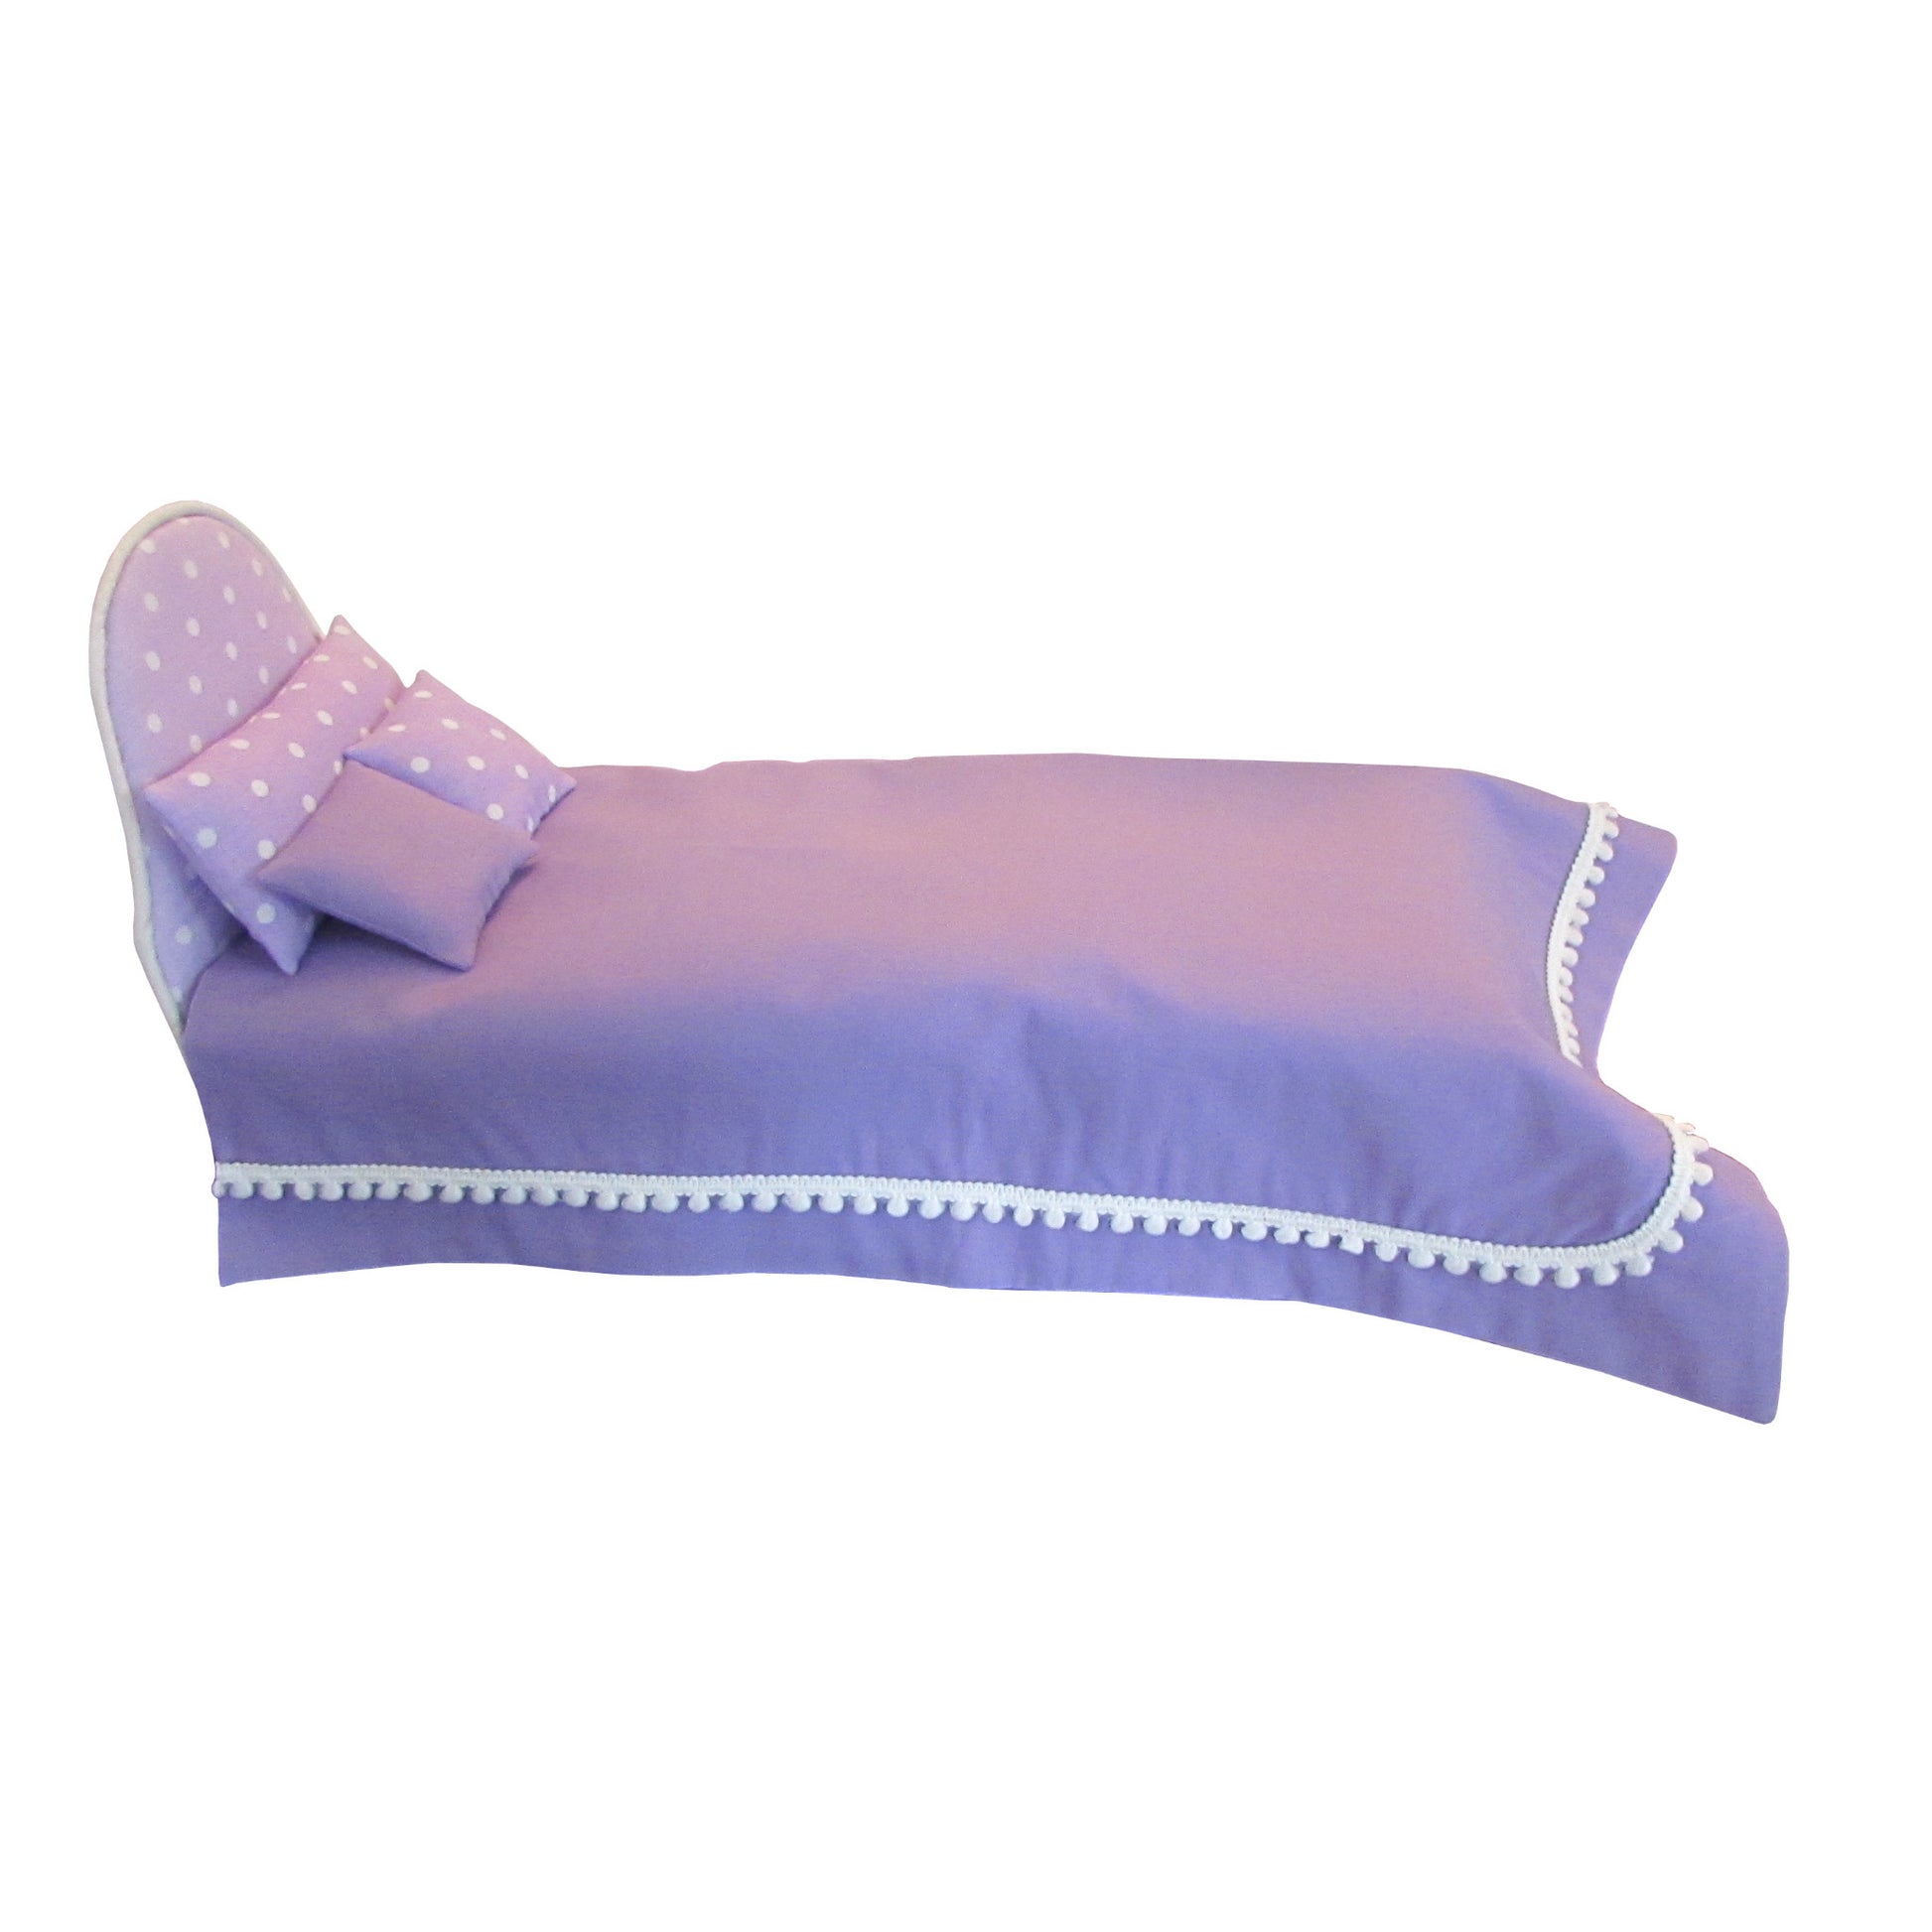 Lavender Dots Doll Headboard and Lavender Doll Bedding 11.5-inch and 12-inch dolls